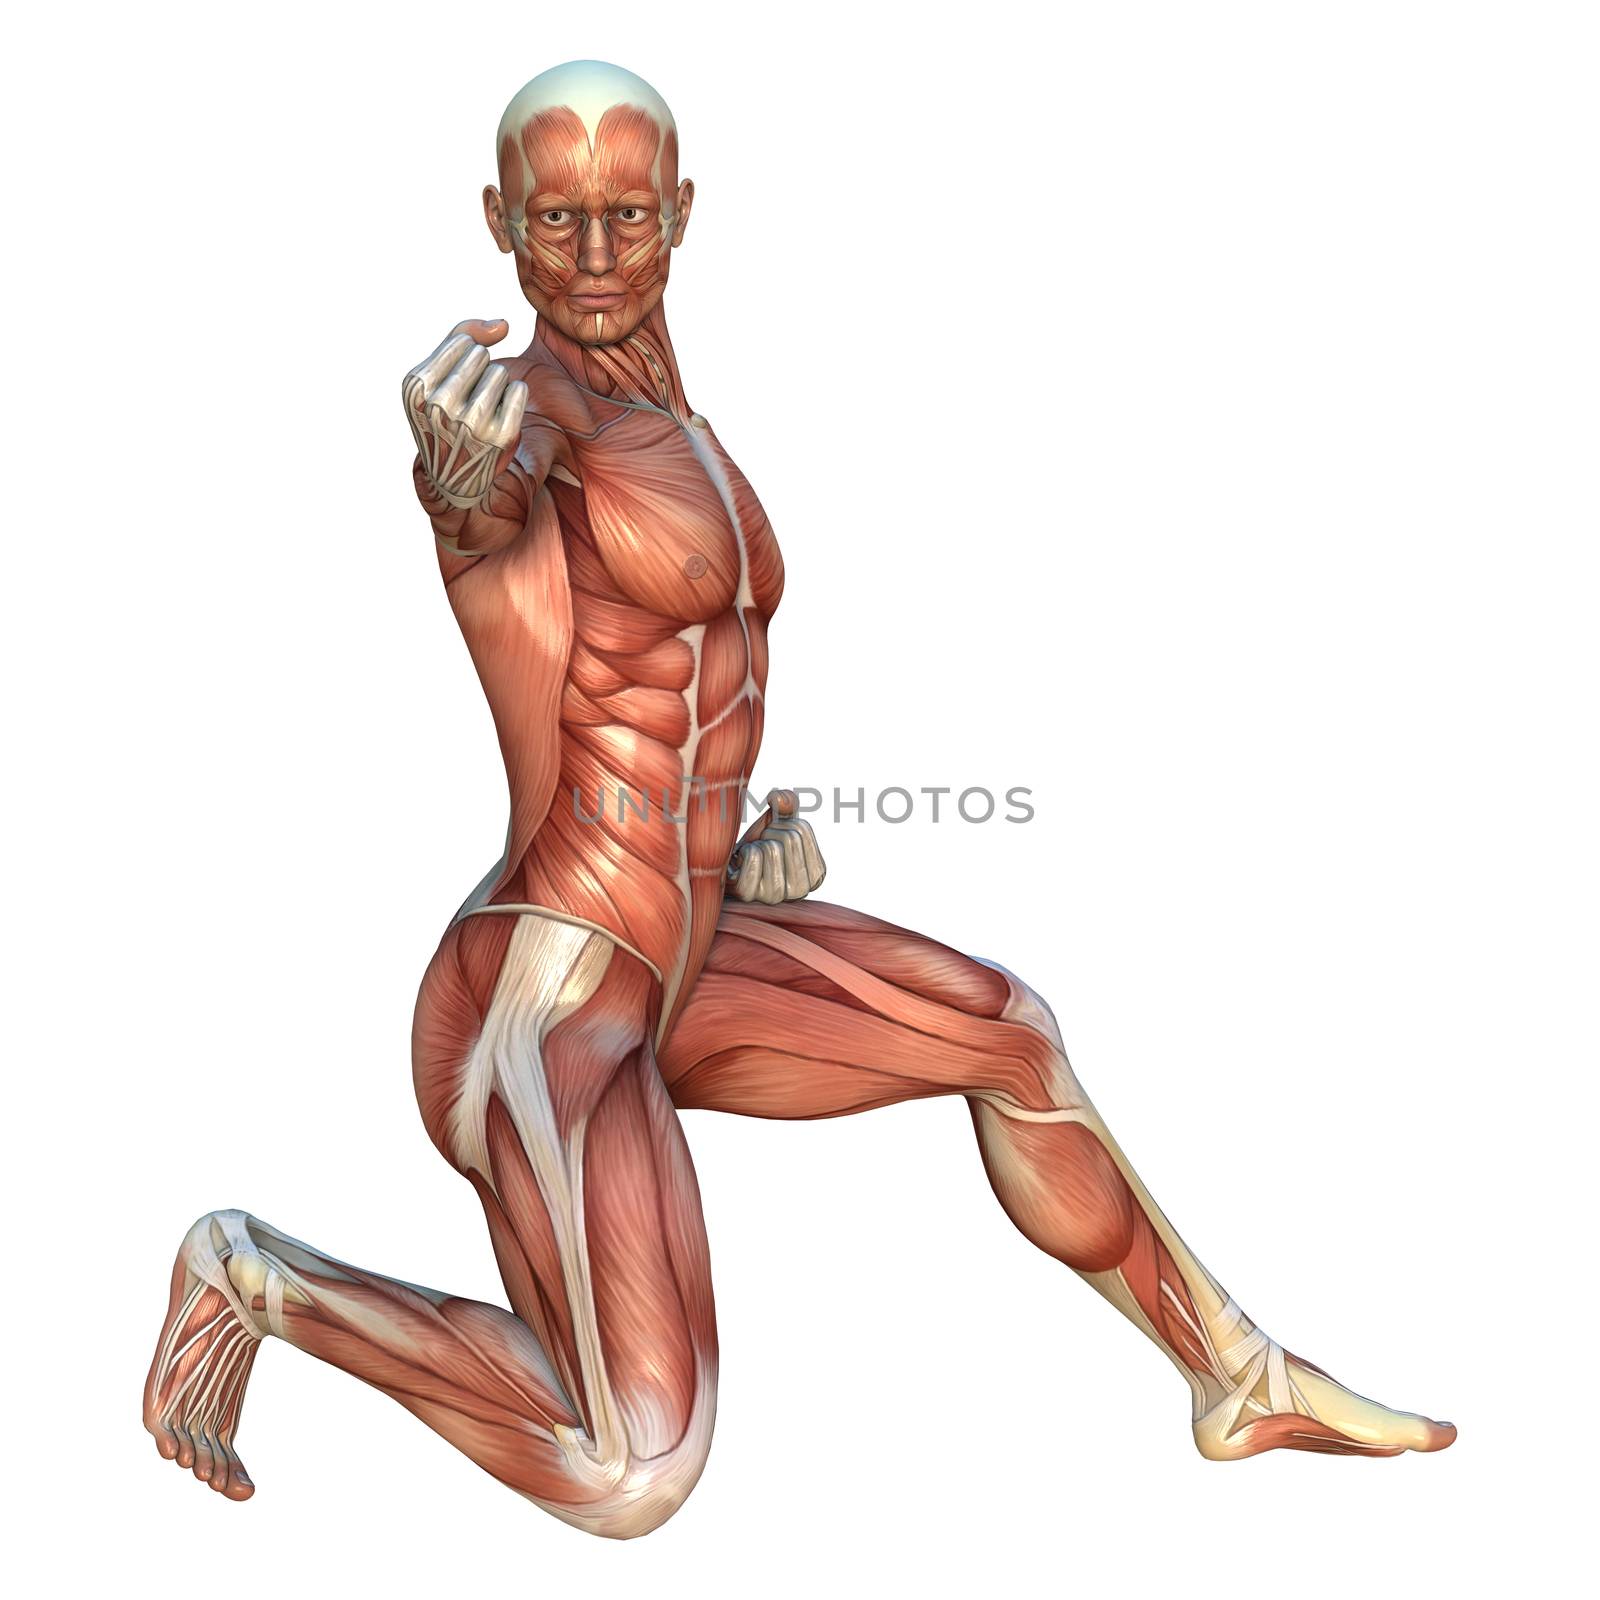 3D digital render of a human figure with muscle maps in a oi-zuki martial arts position isolated on white background